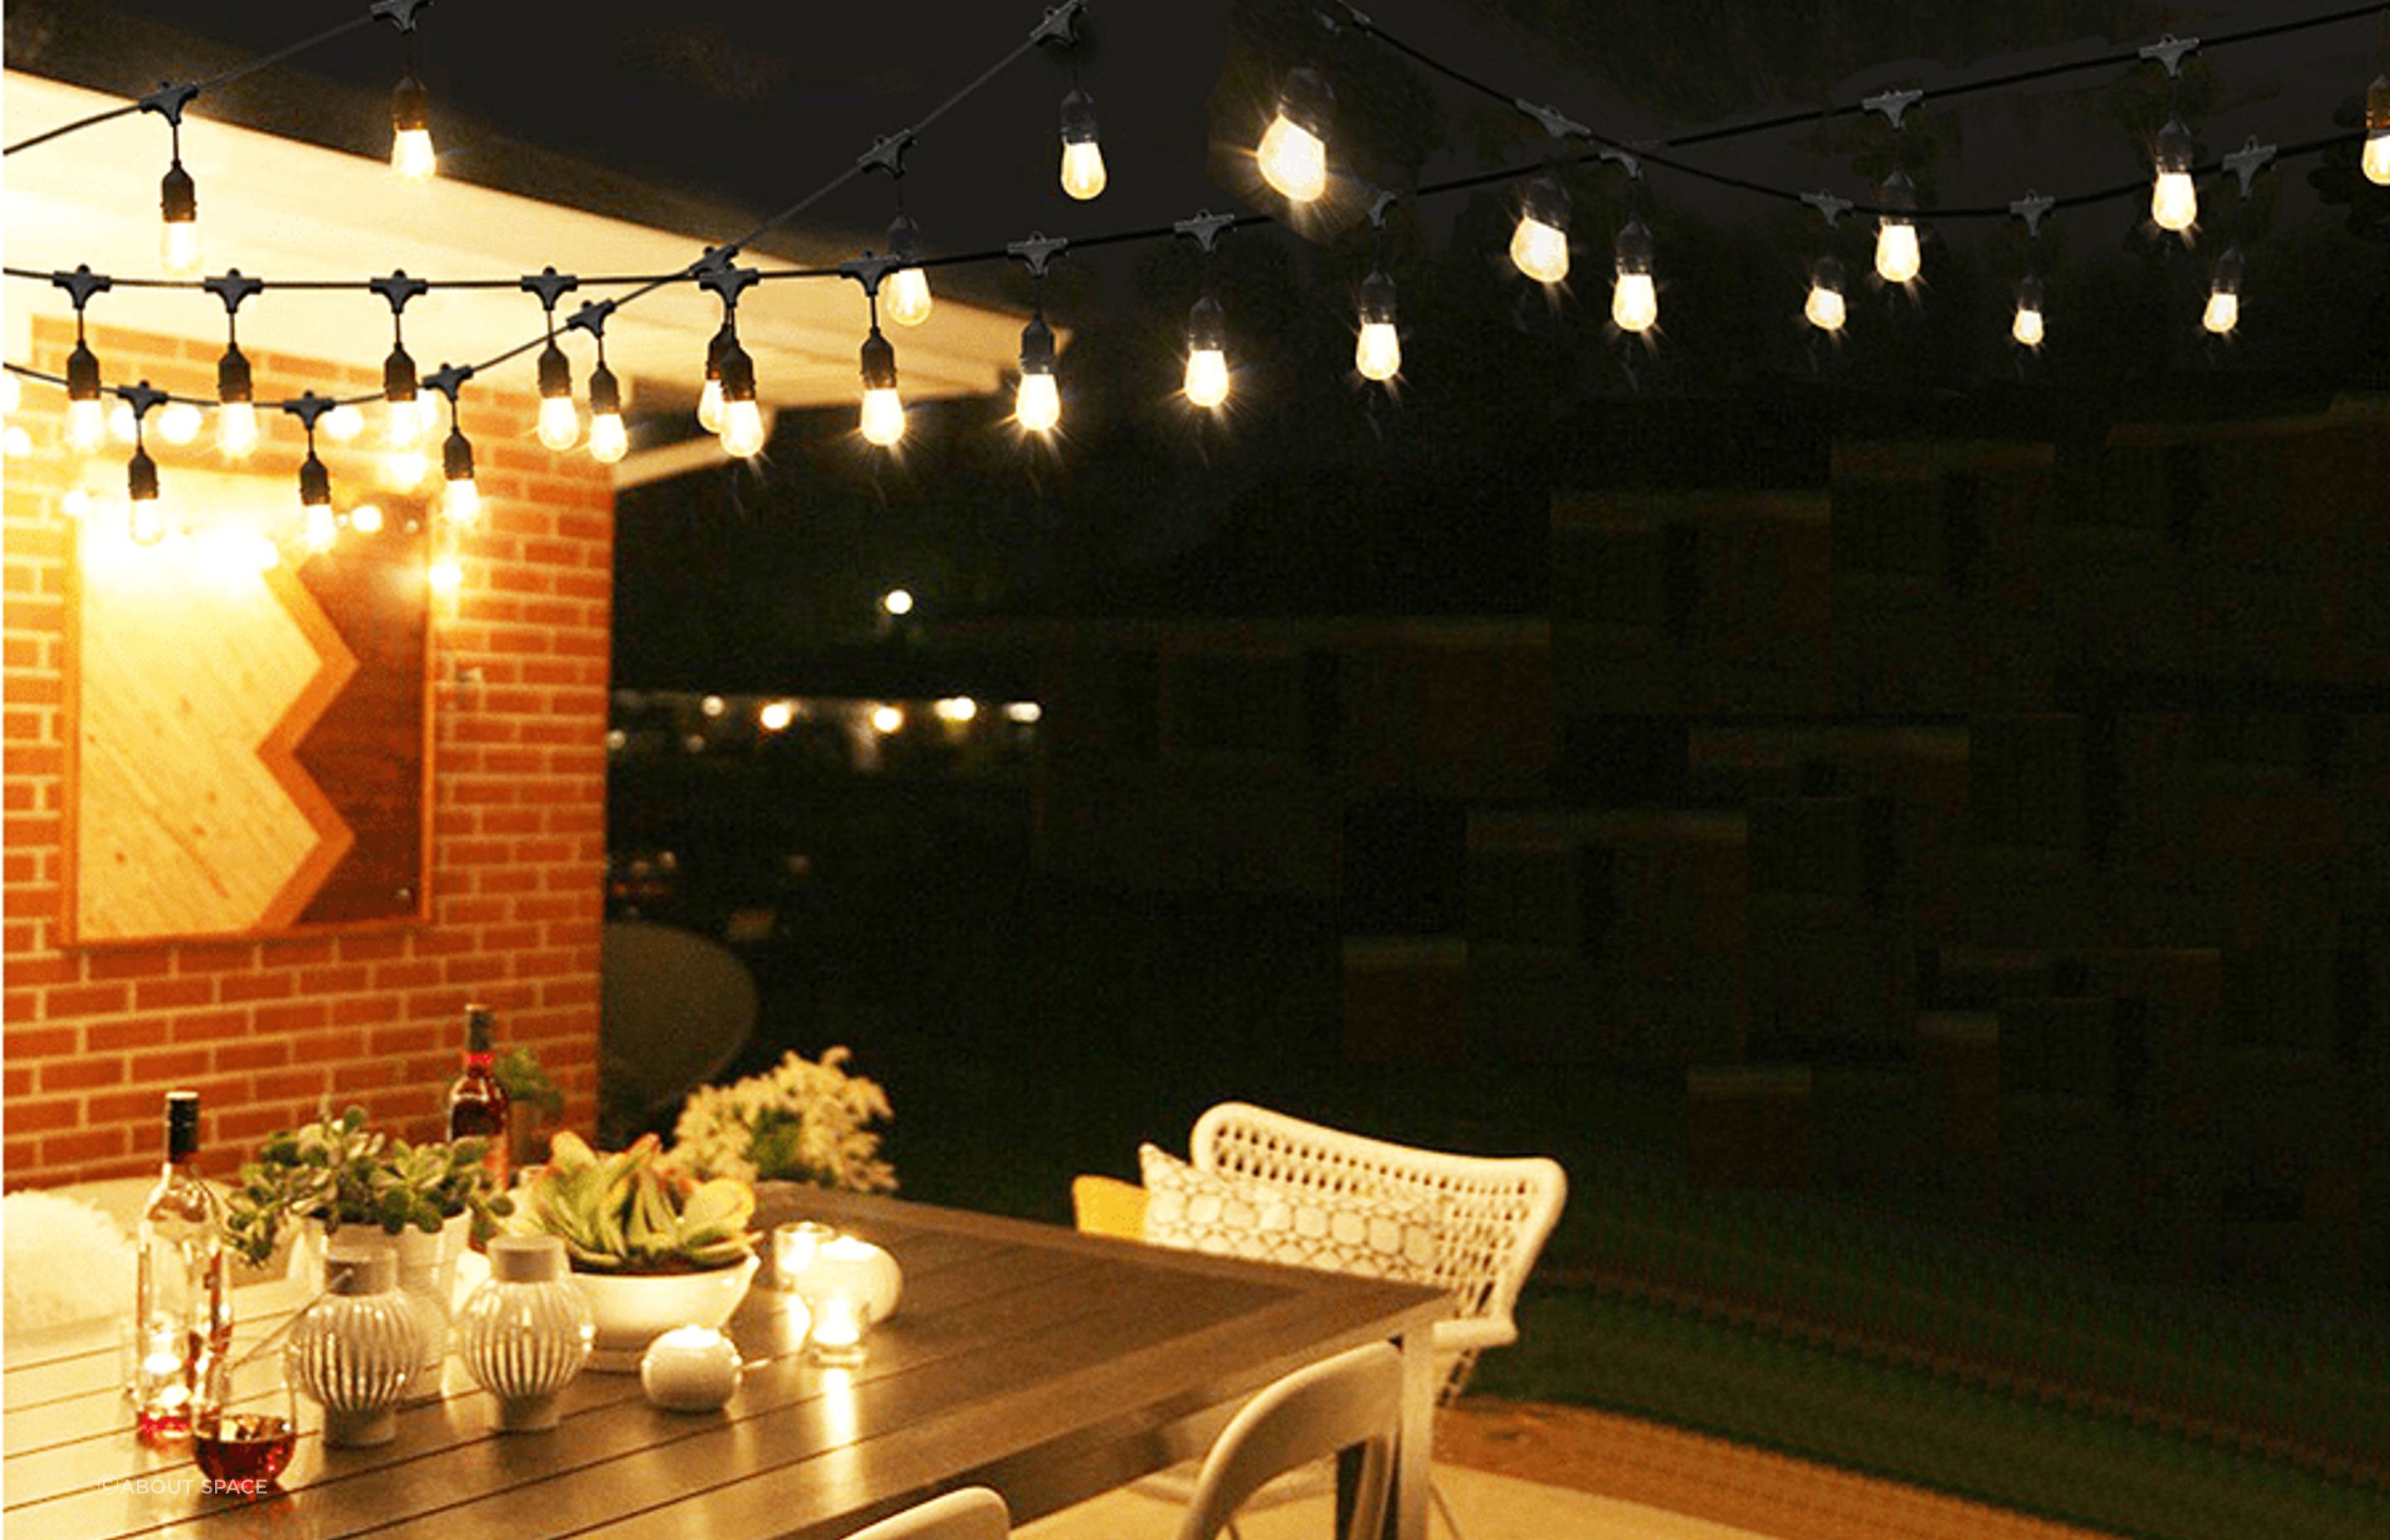 Festoon Custom Outdoor Lighting from About Space